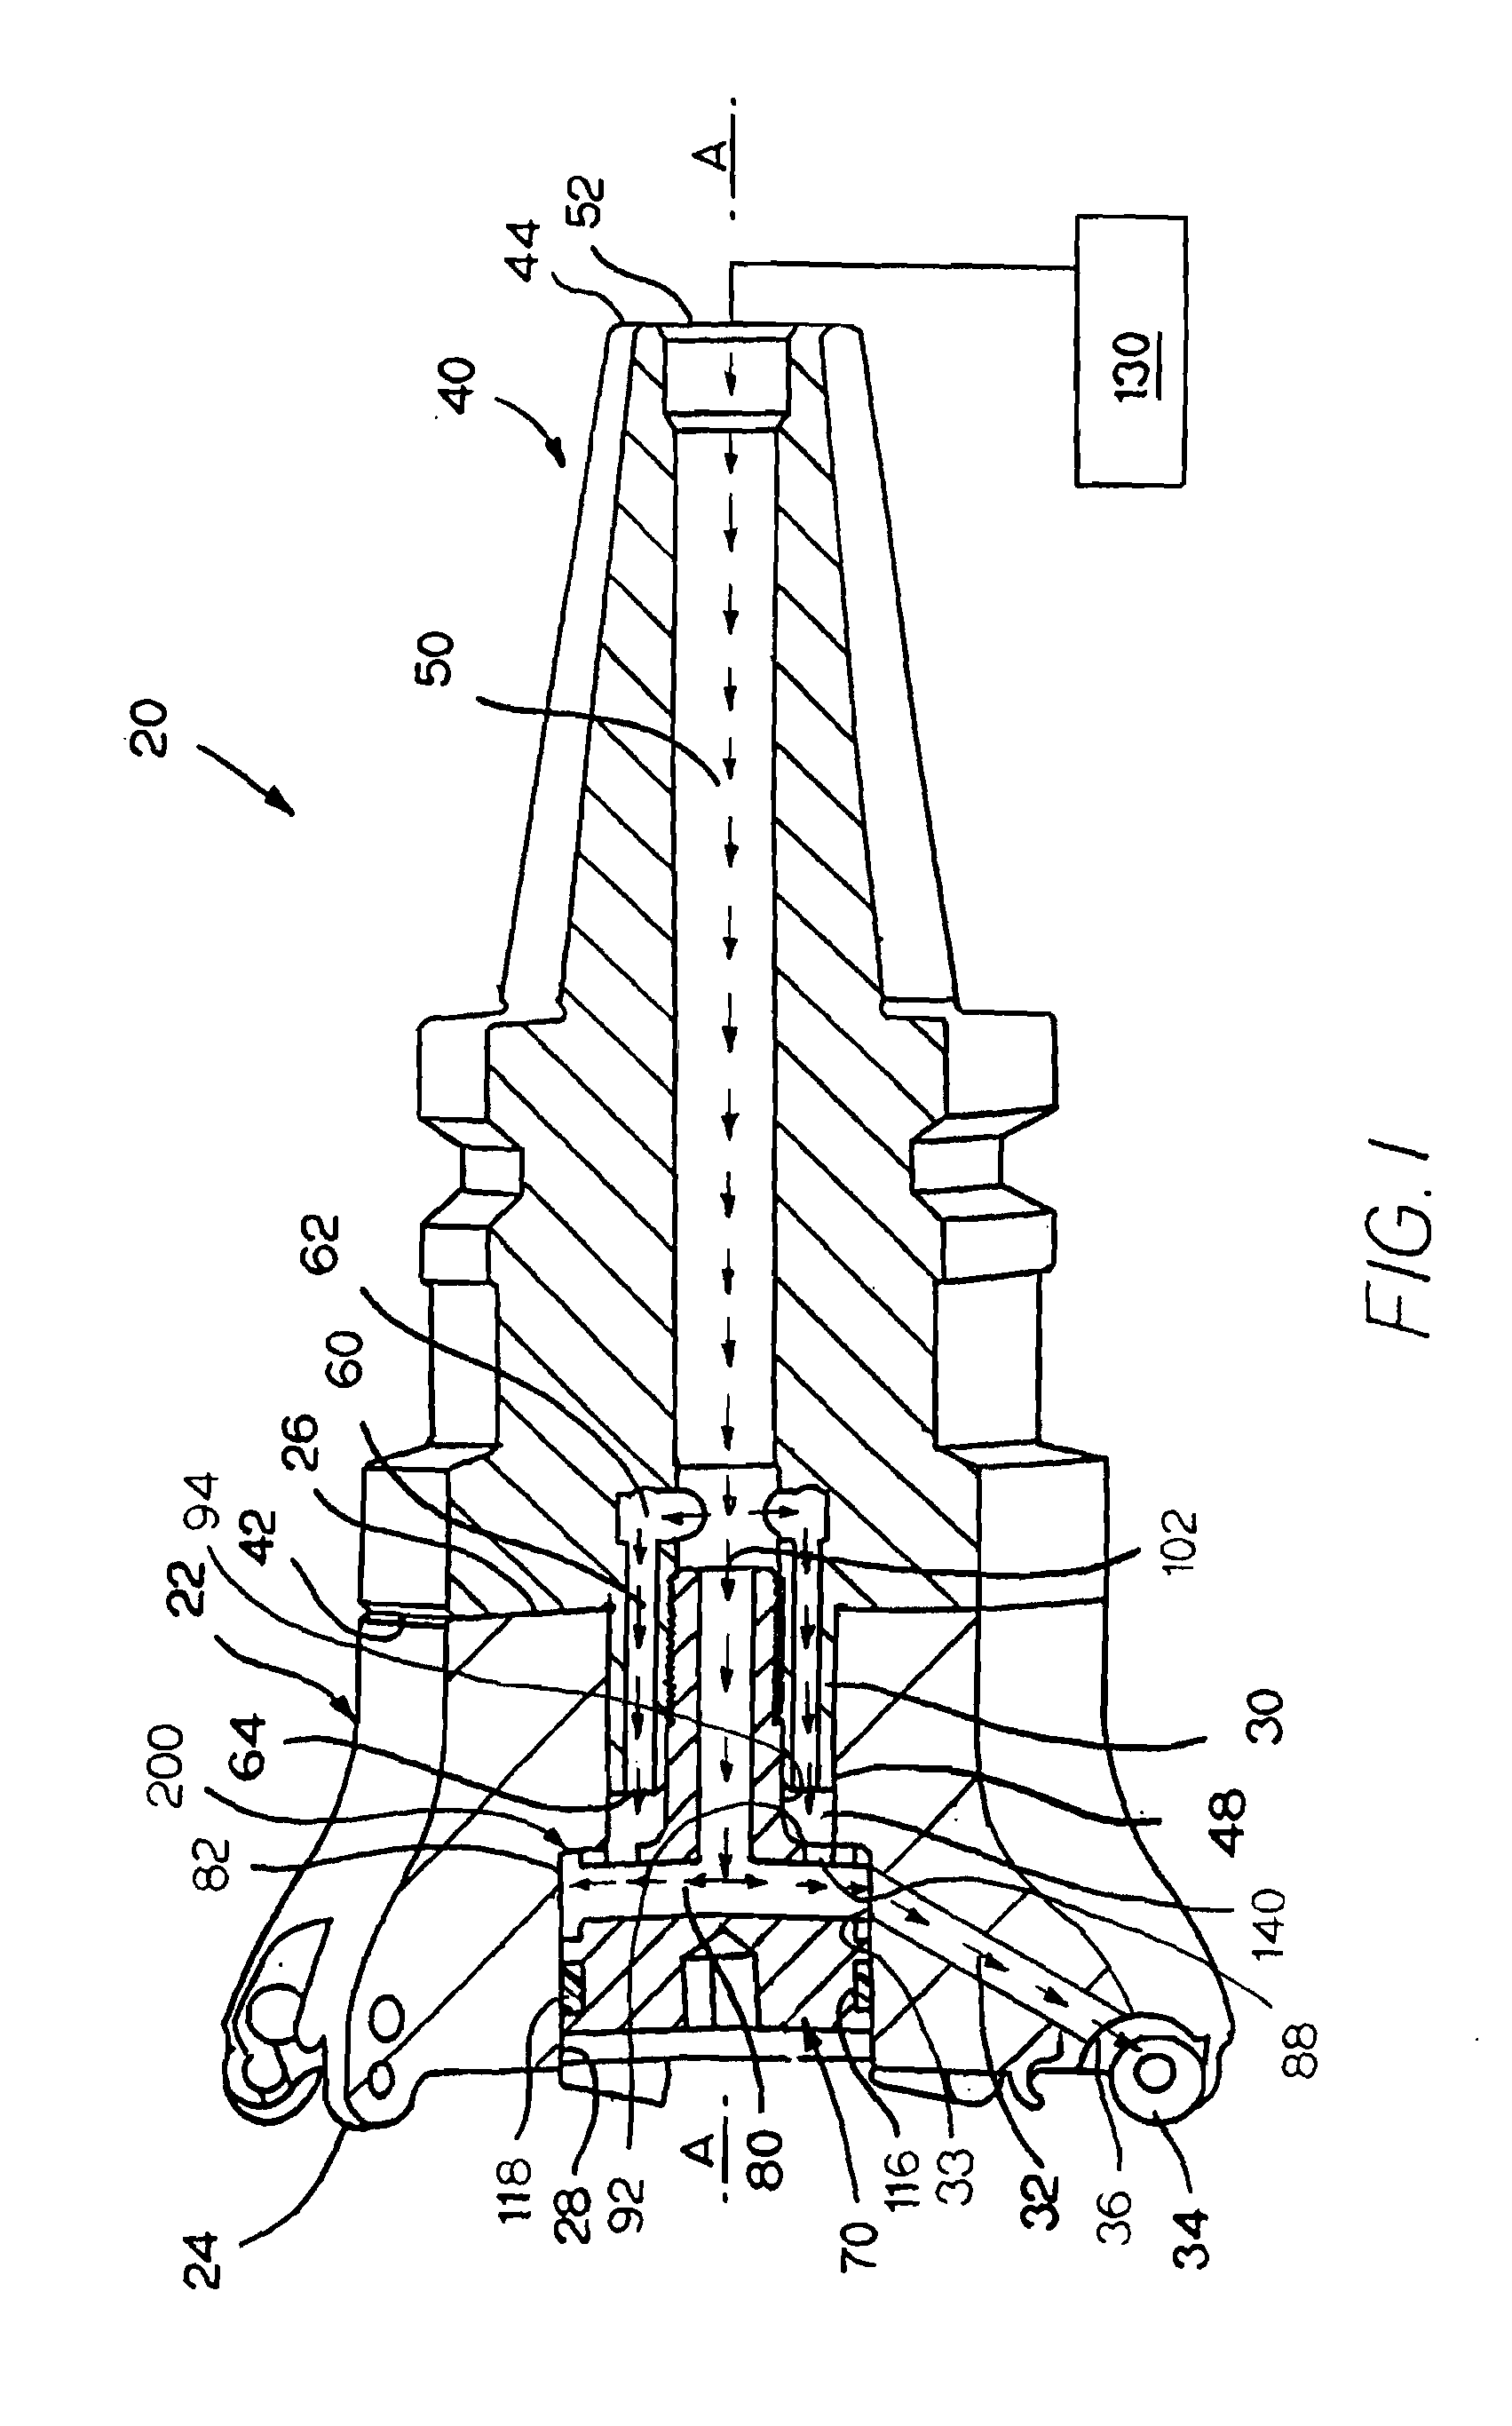 Cutting tool including a locking screw and adapter with coolant delivery